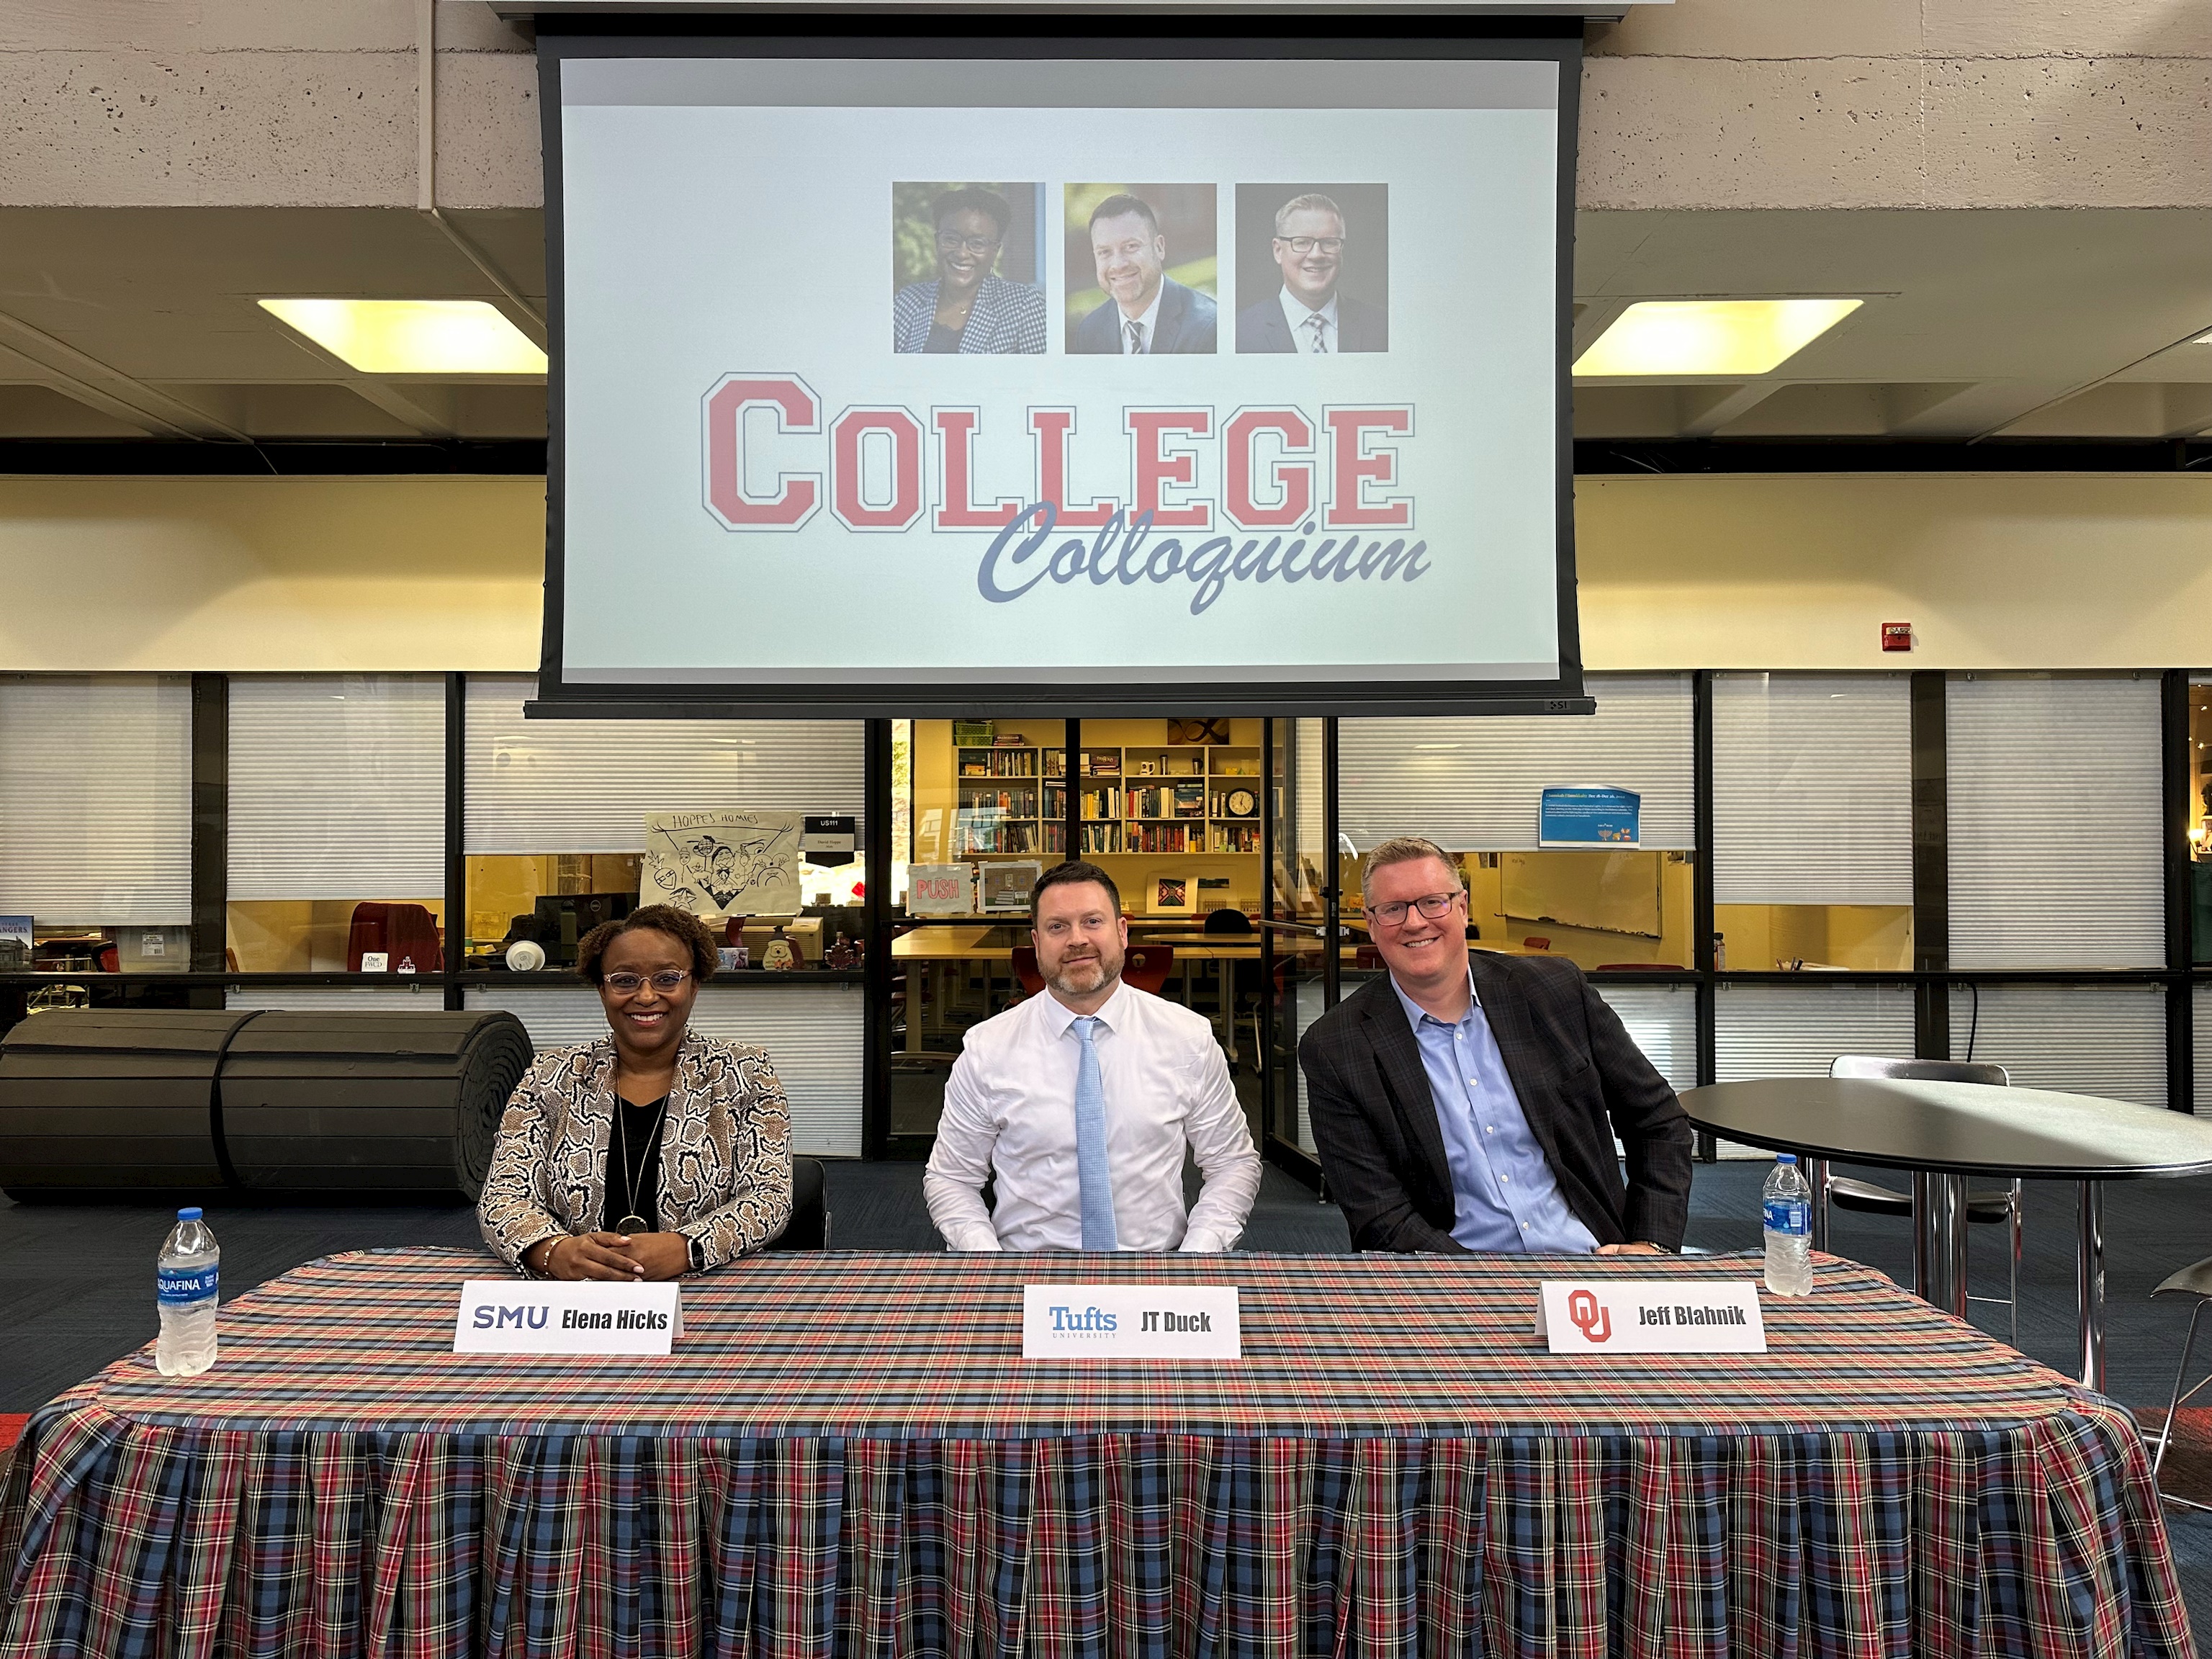 College Colloquium: The latest on the college application front AND the FWCD front